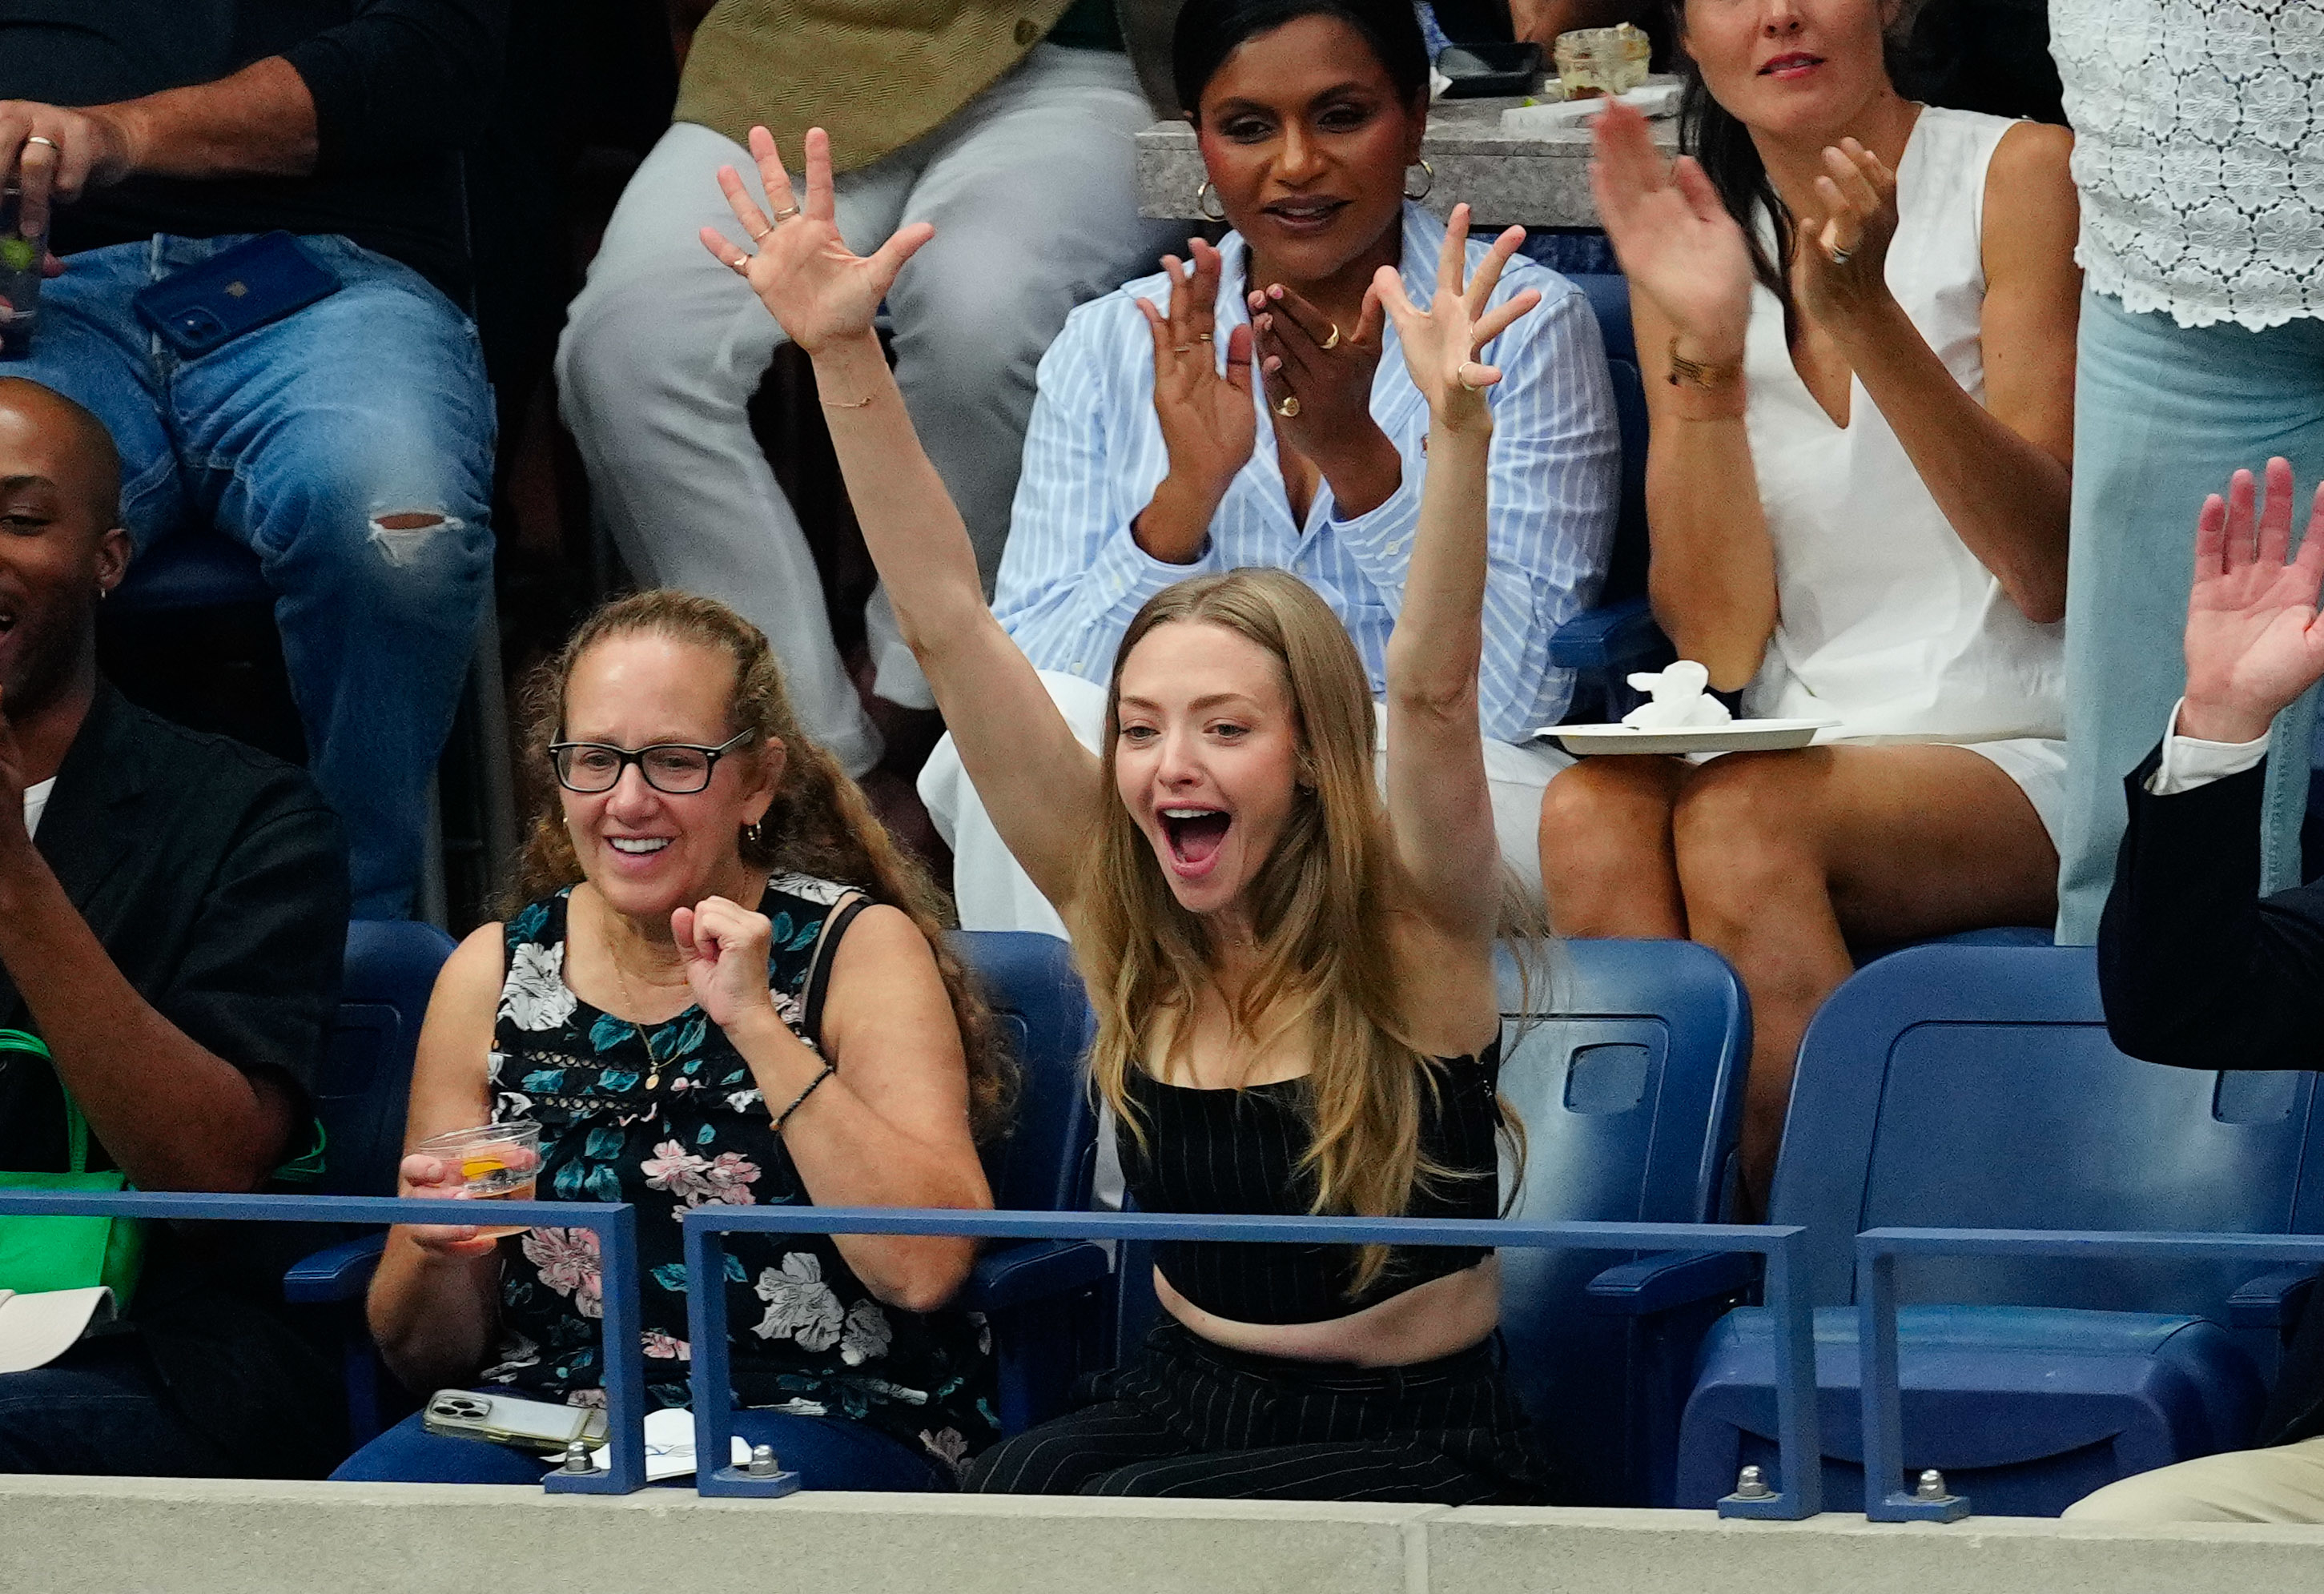 Amanda Seyfried cheering with her arms raised in the air